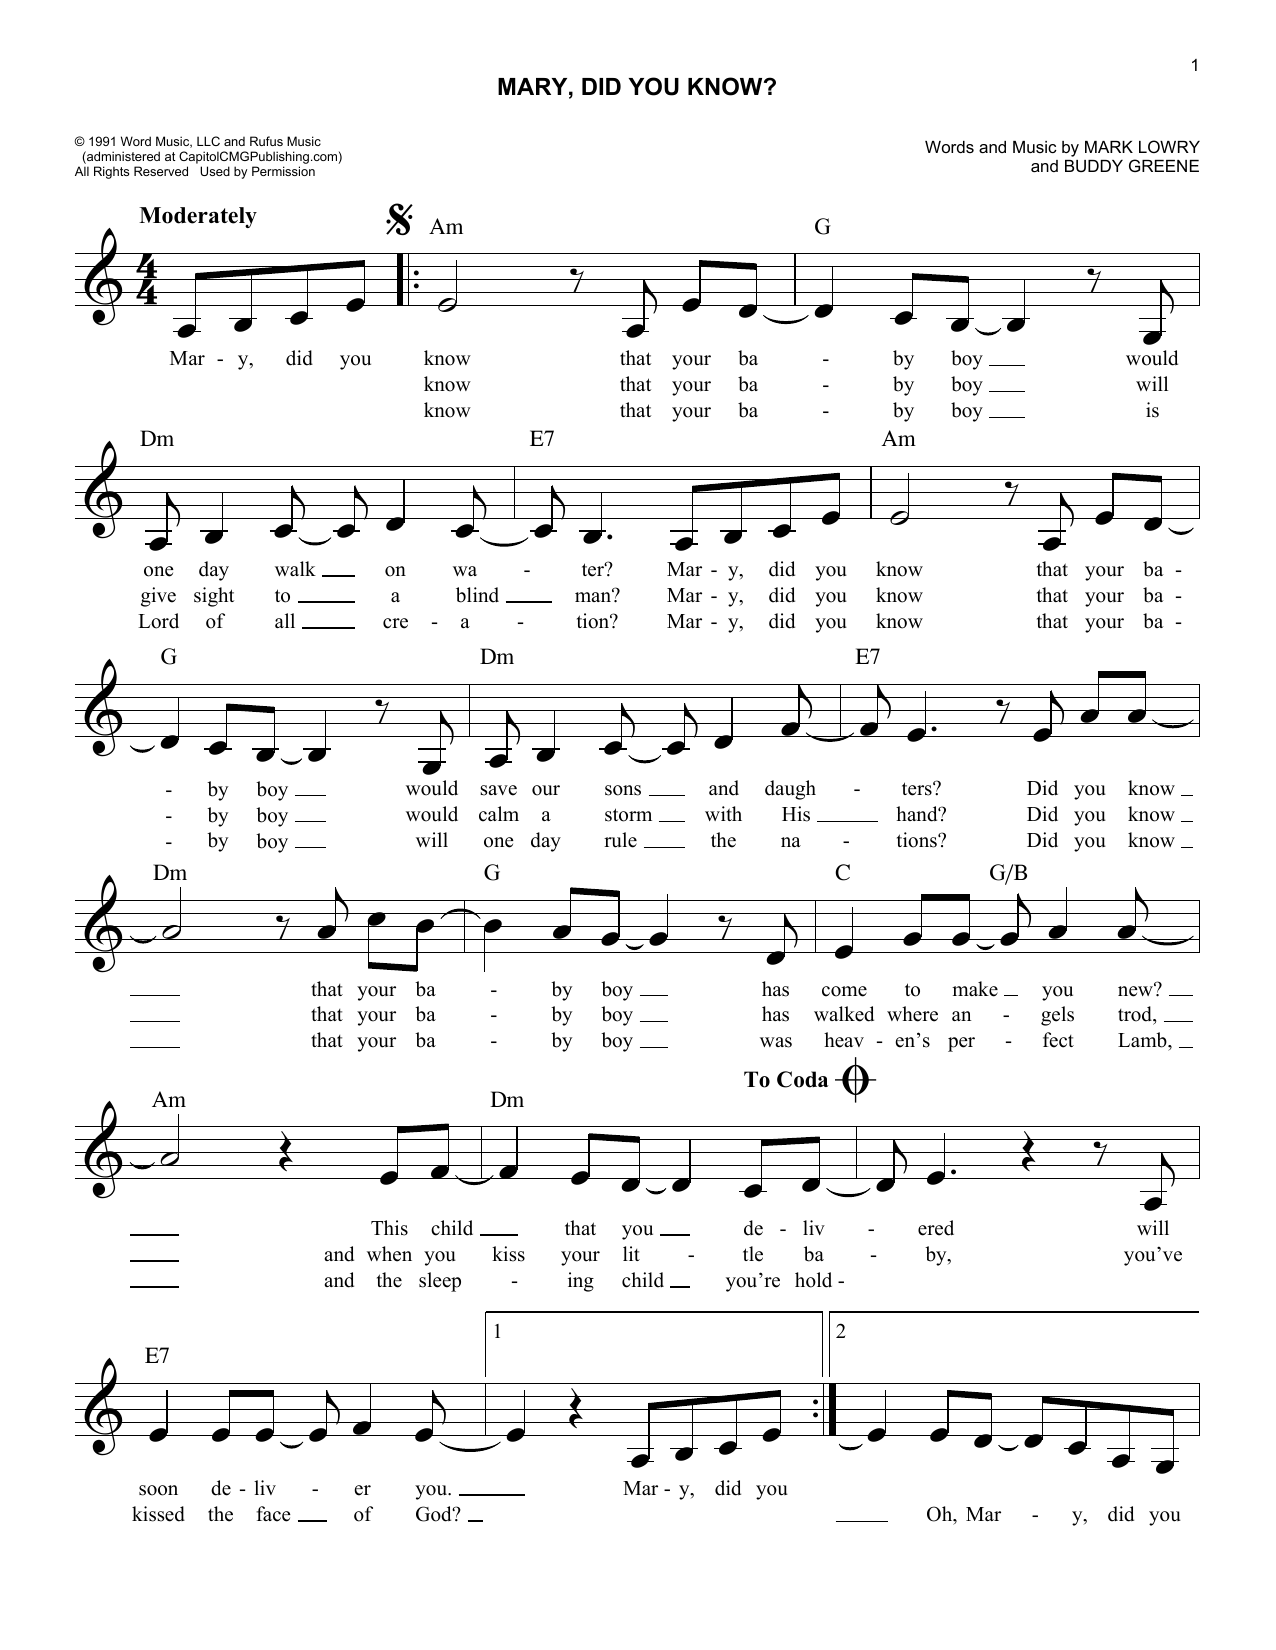 Download Mark Lowry Mary, Did You Know? Sheet Music